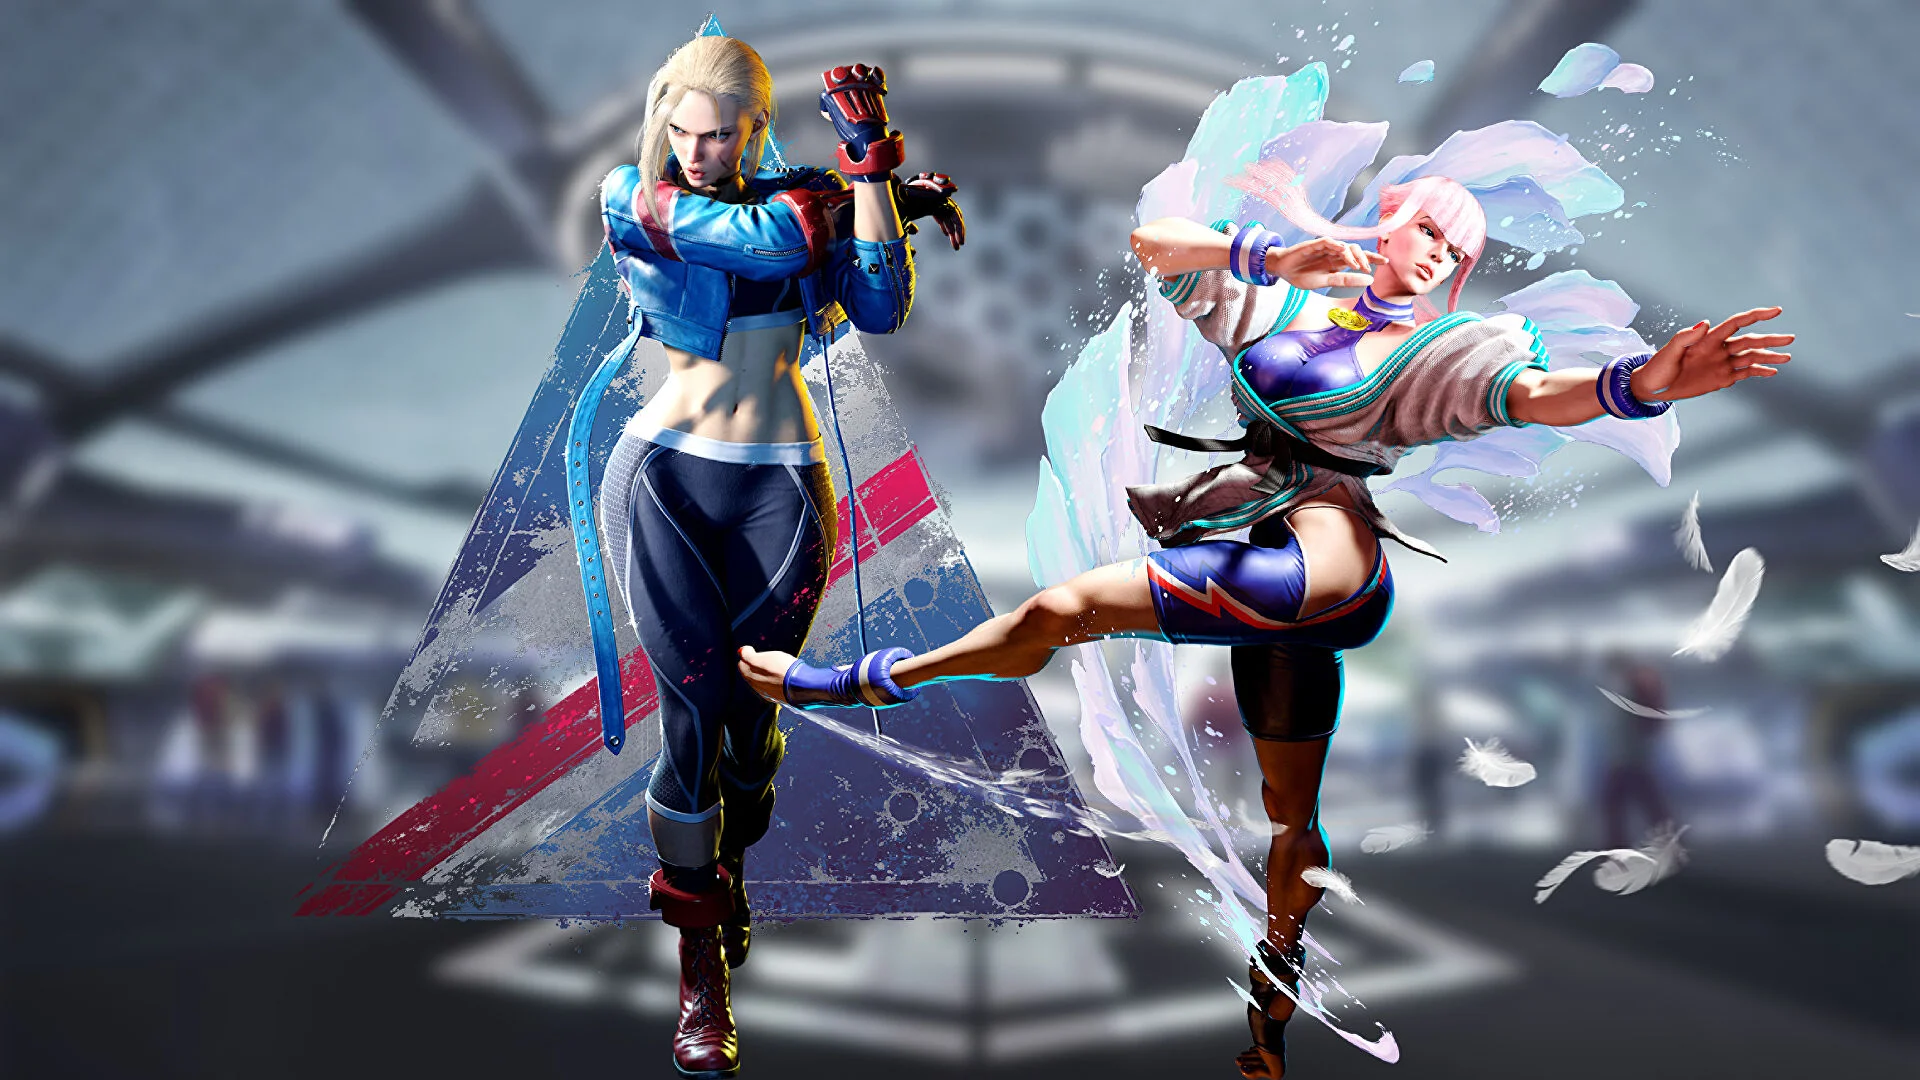 The gameplay video of Street Fighter 6 showed a fight between two heroines